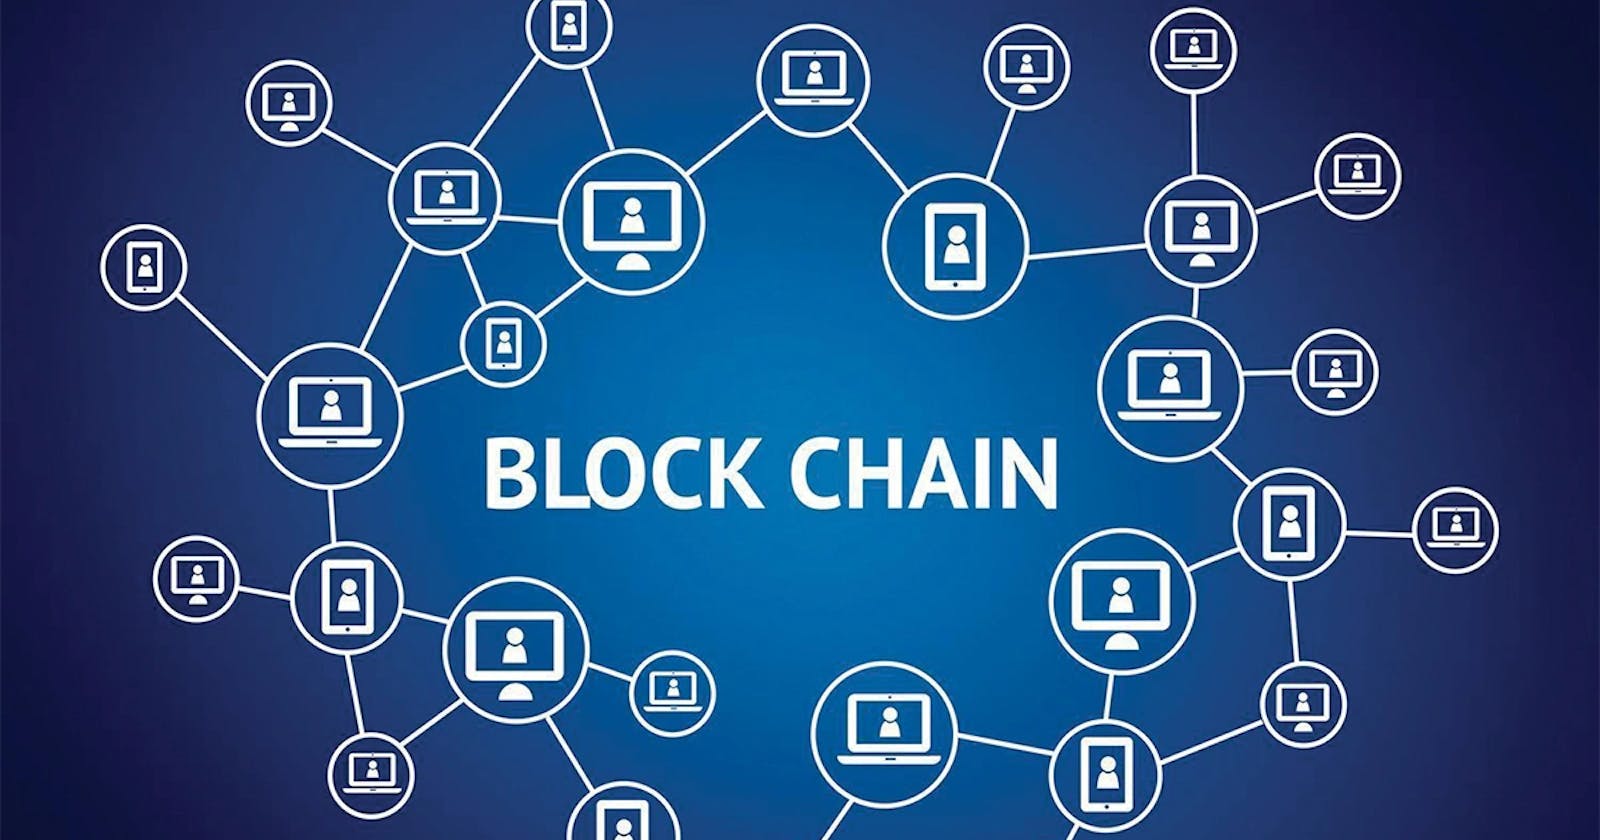 Creating your own blockchain network